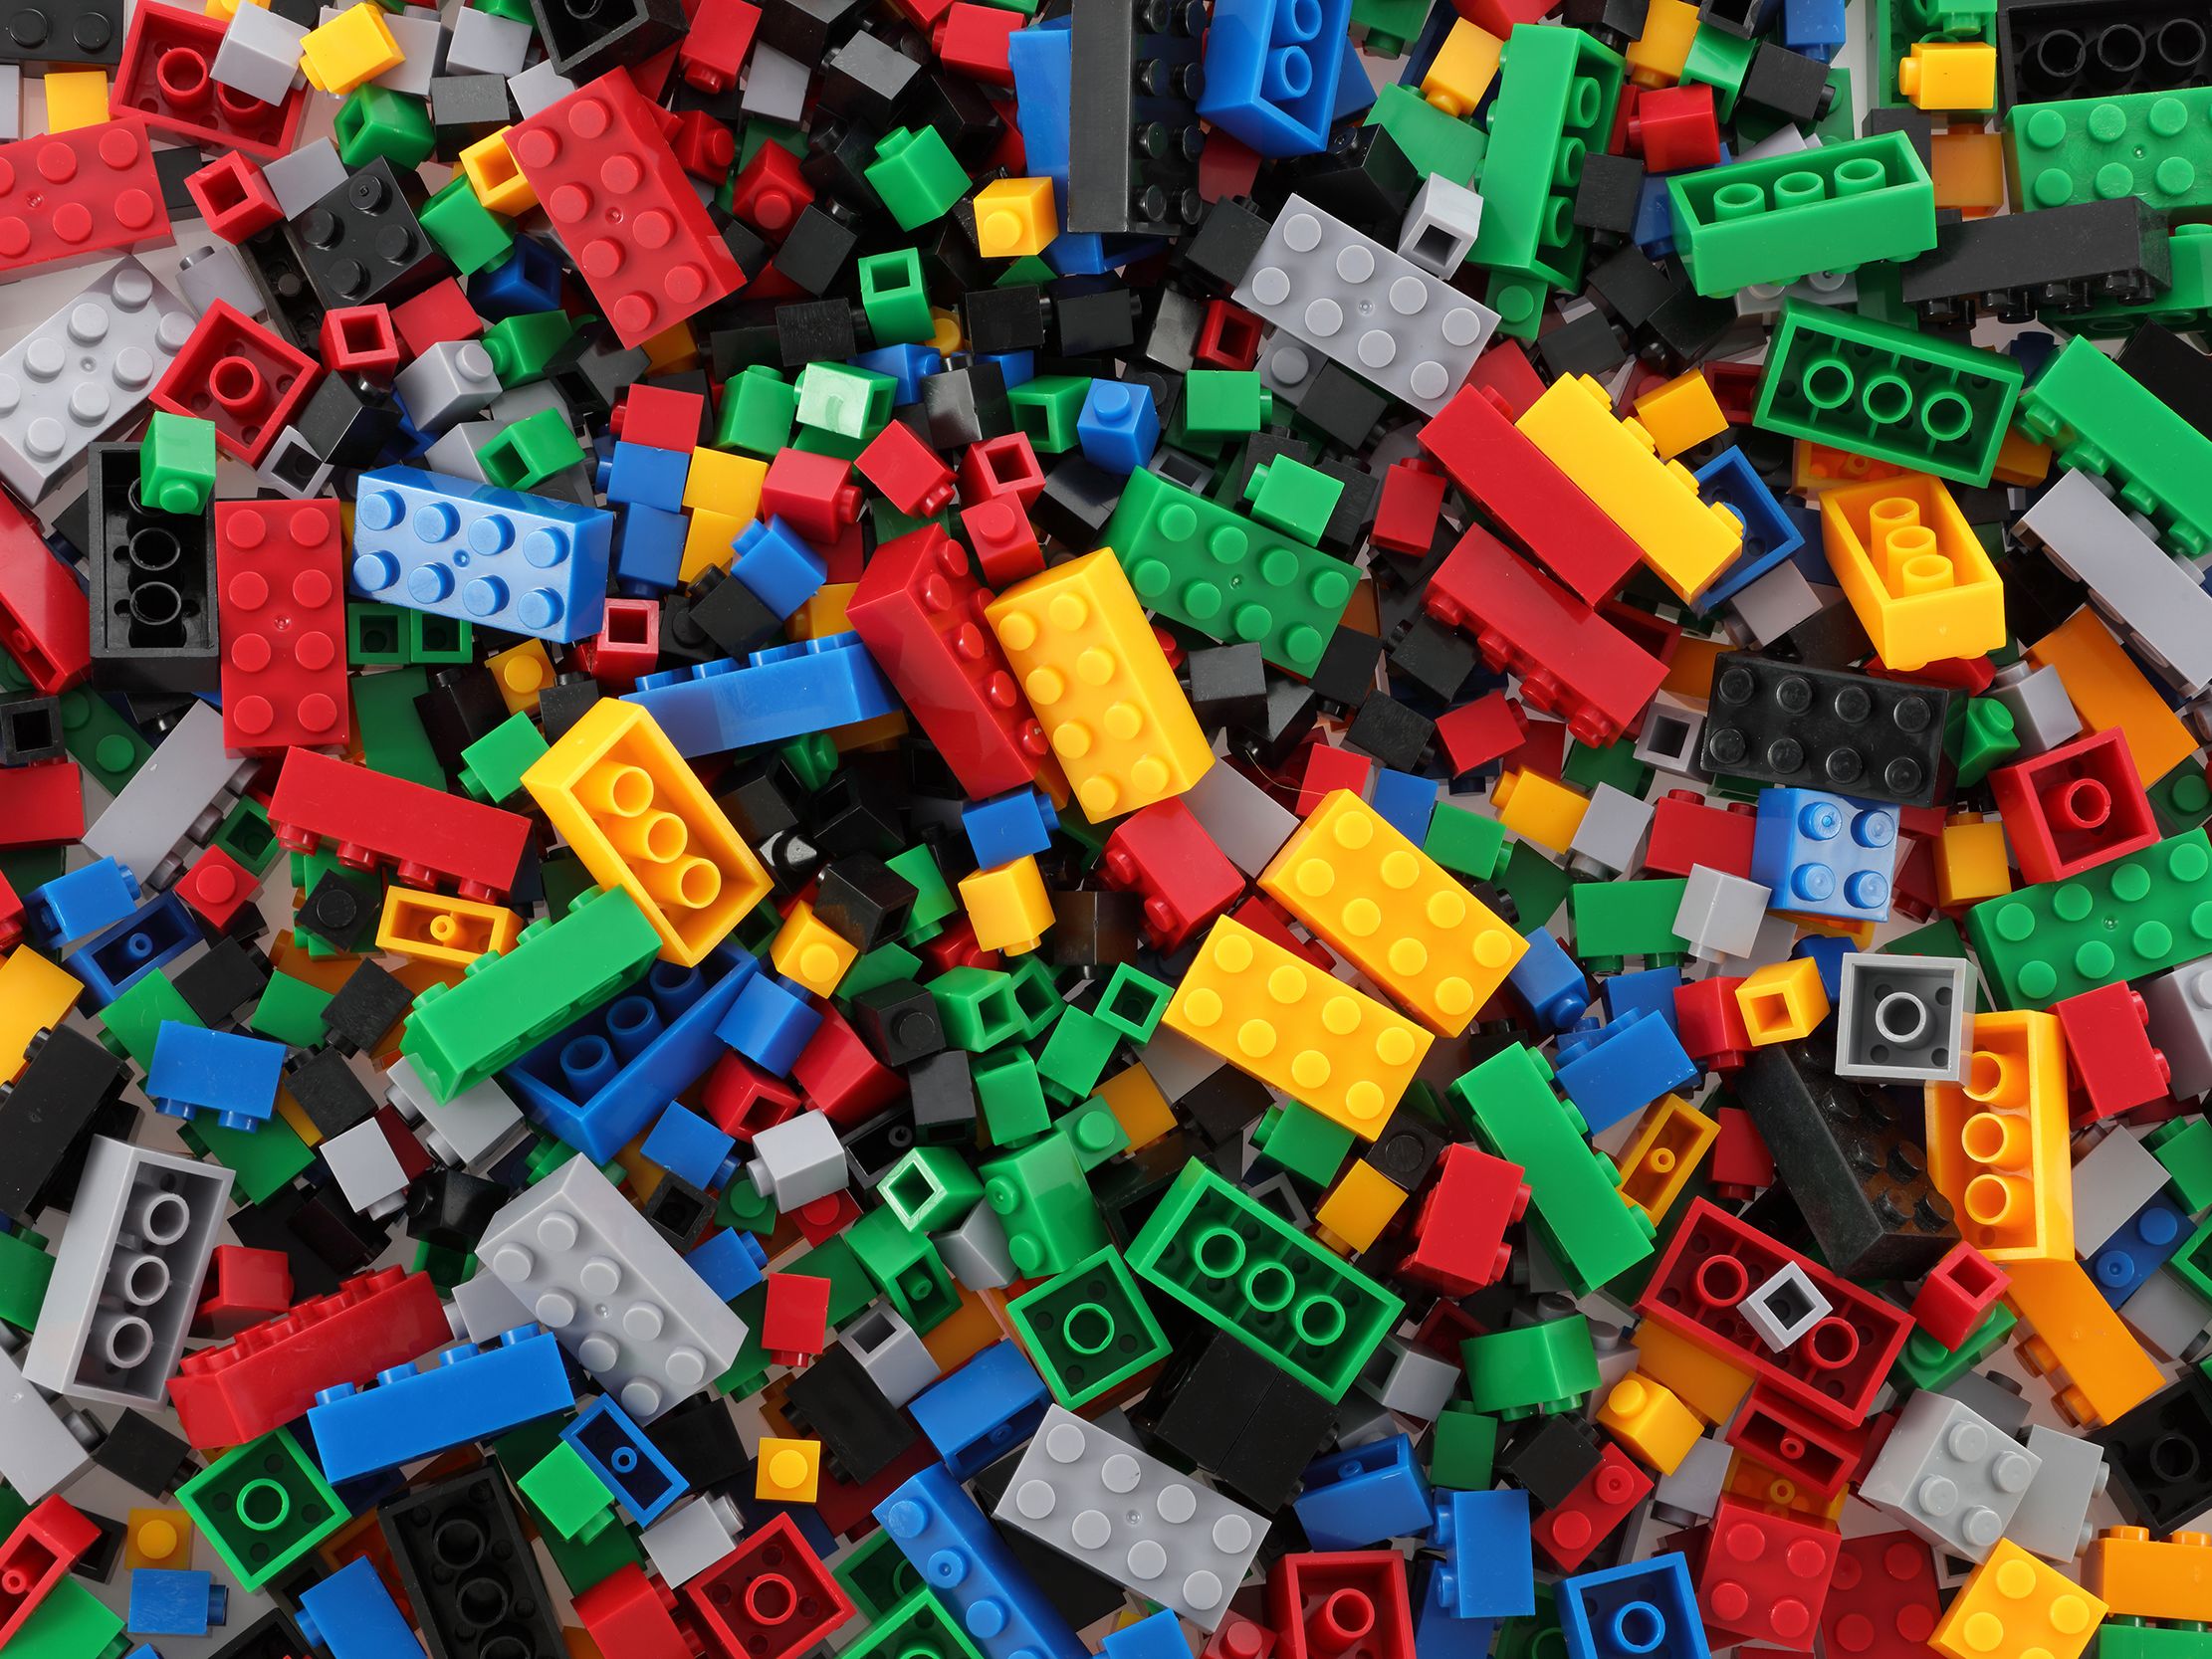 Opinion: Why Lego is the best toy invented CNN